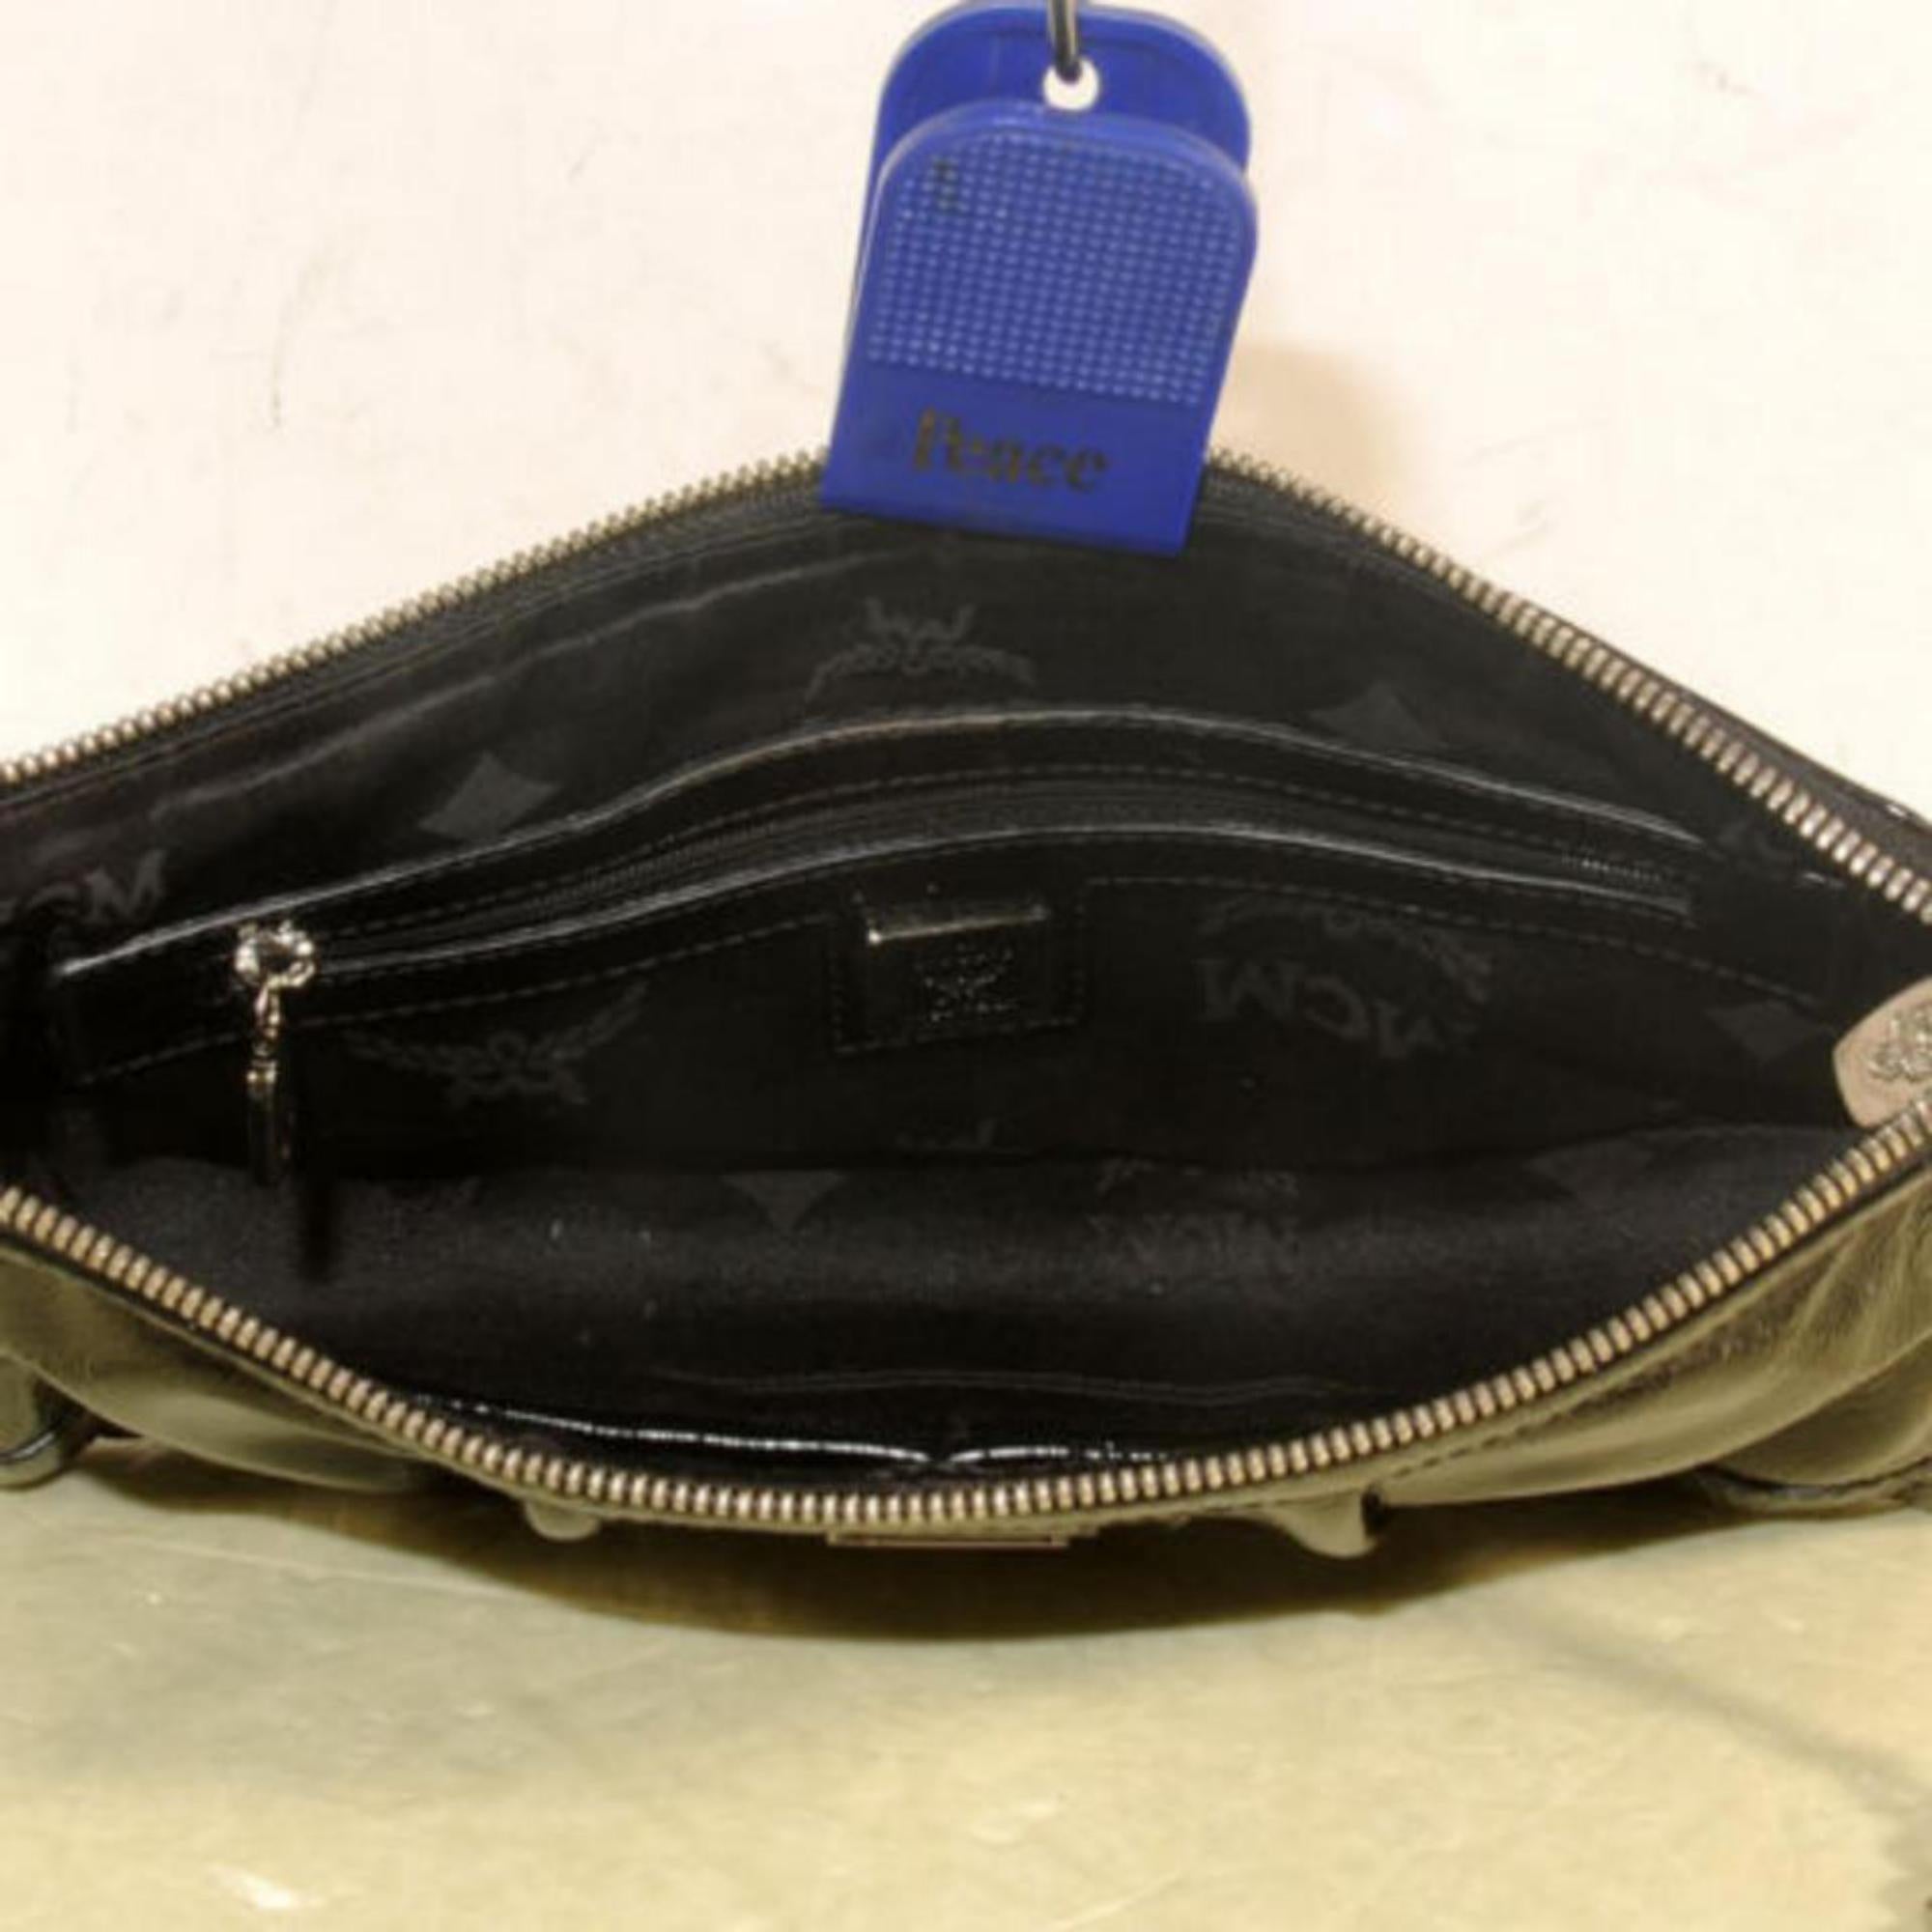 MCM Chain 869163 Black Patent Leather Shoulder Bag In Good Condition For Sale In Forest Hills, NY